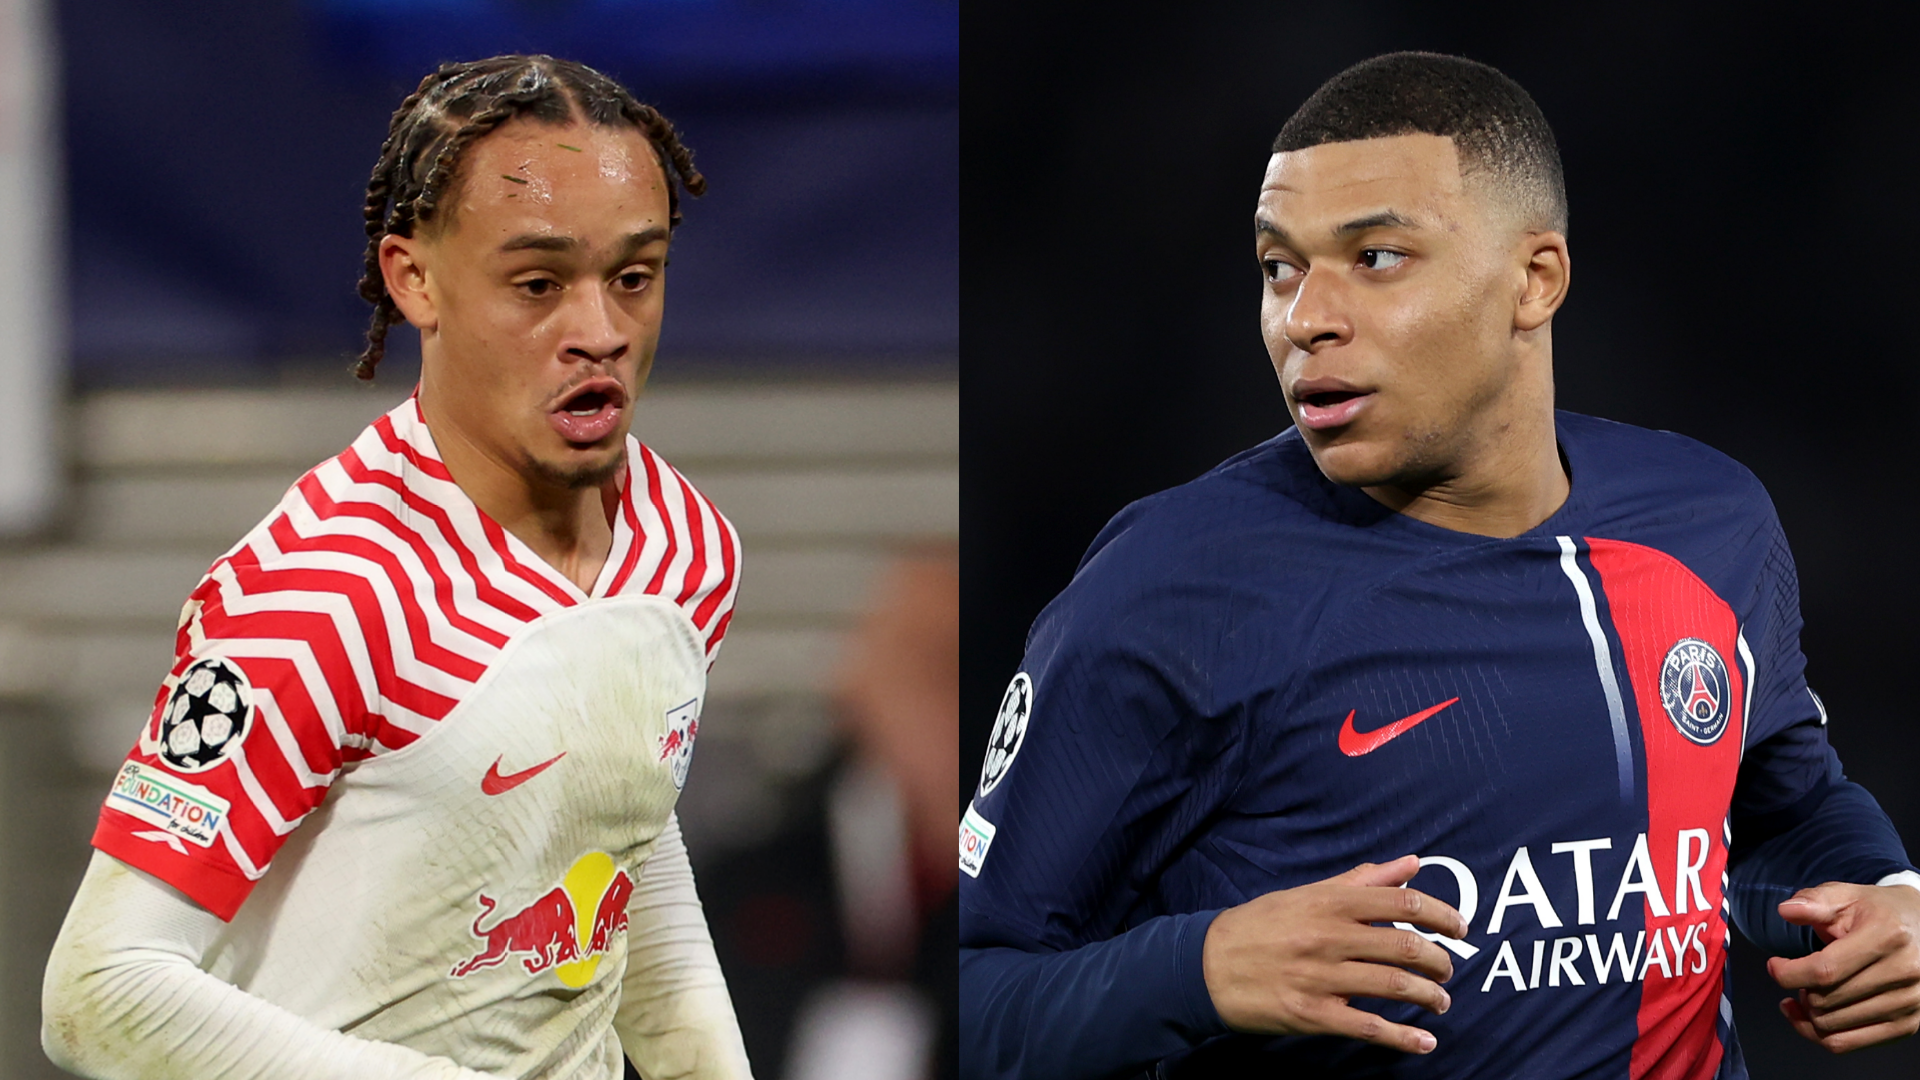 Do PSG already have Kylian Mbappe's replacement? Xavi Simons may play key role on return from RB Leipzig loan after star striker departs thumbnail